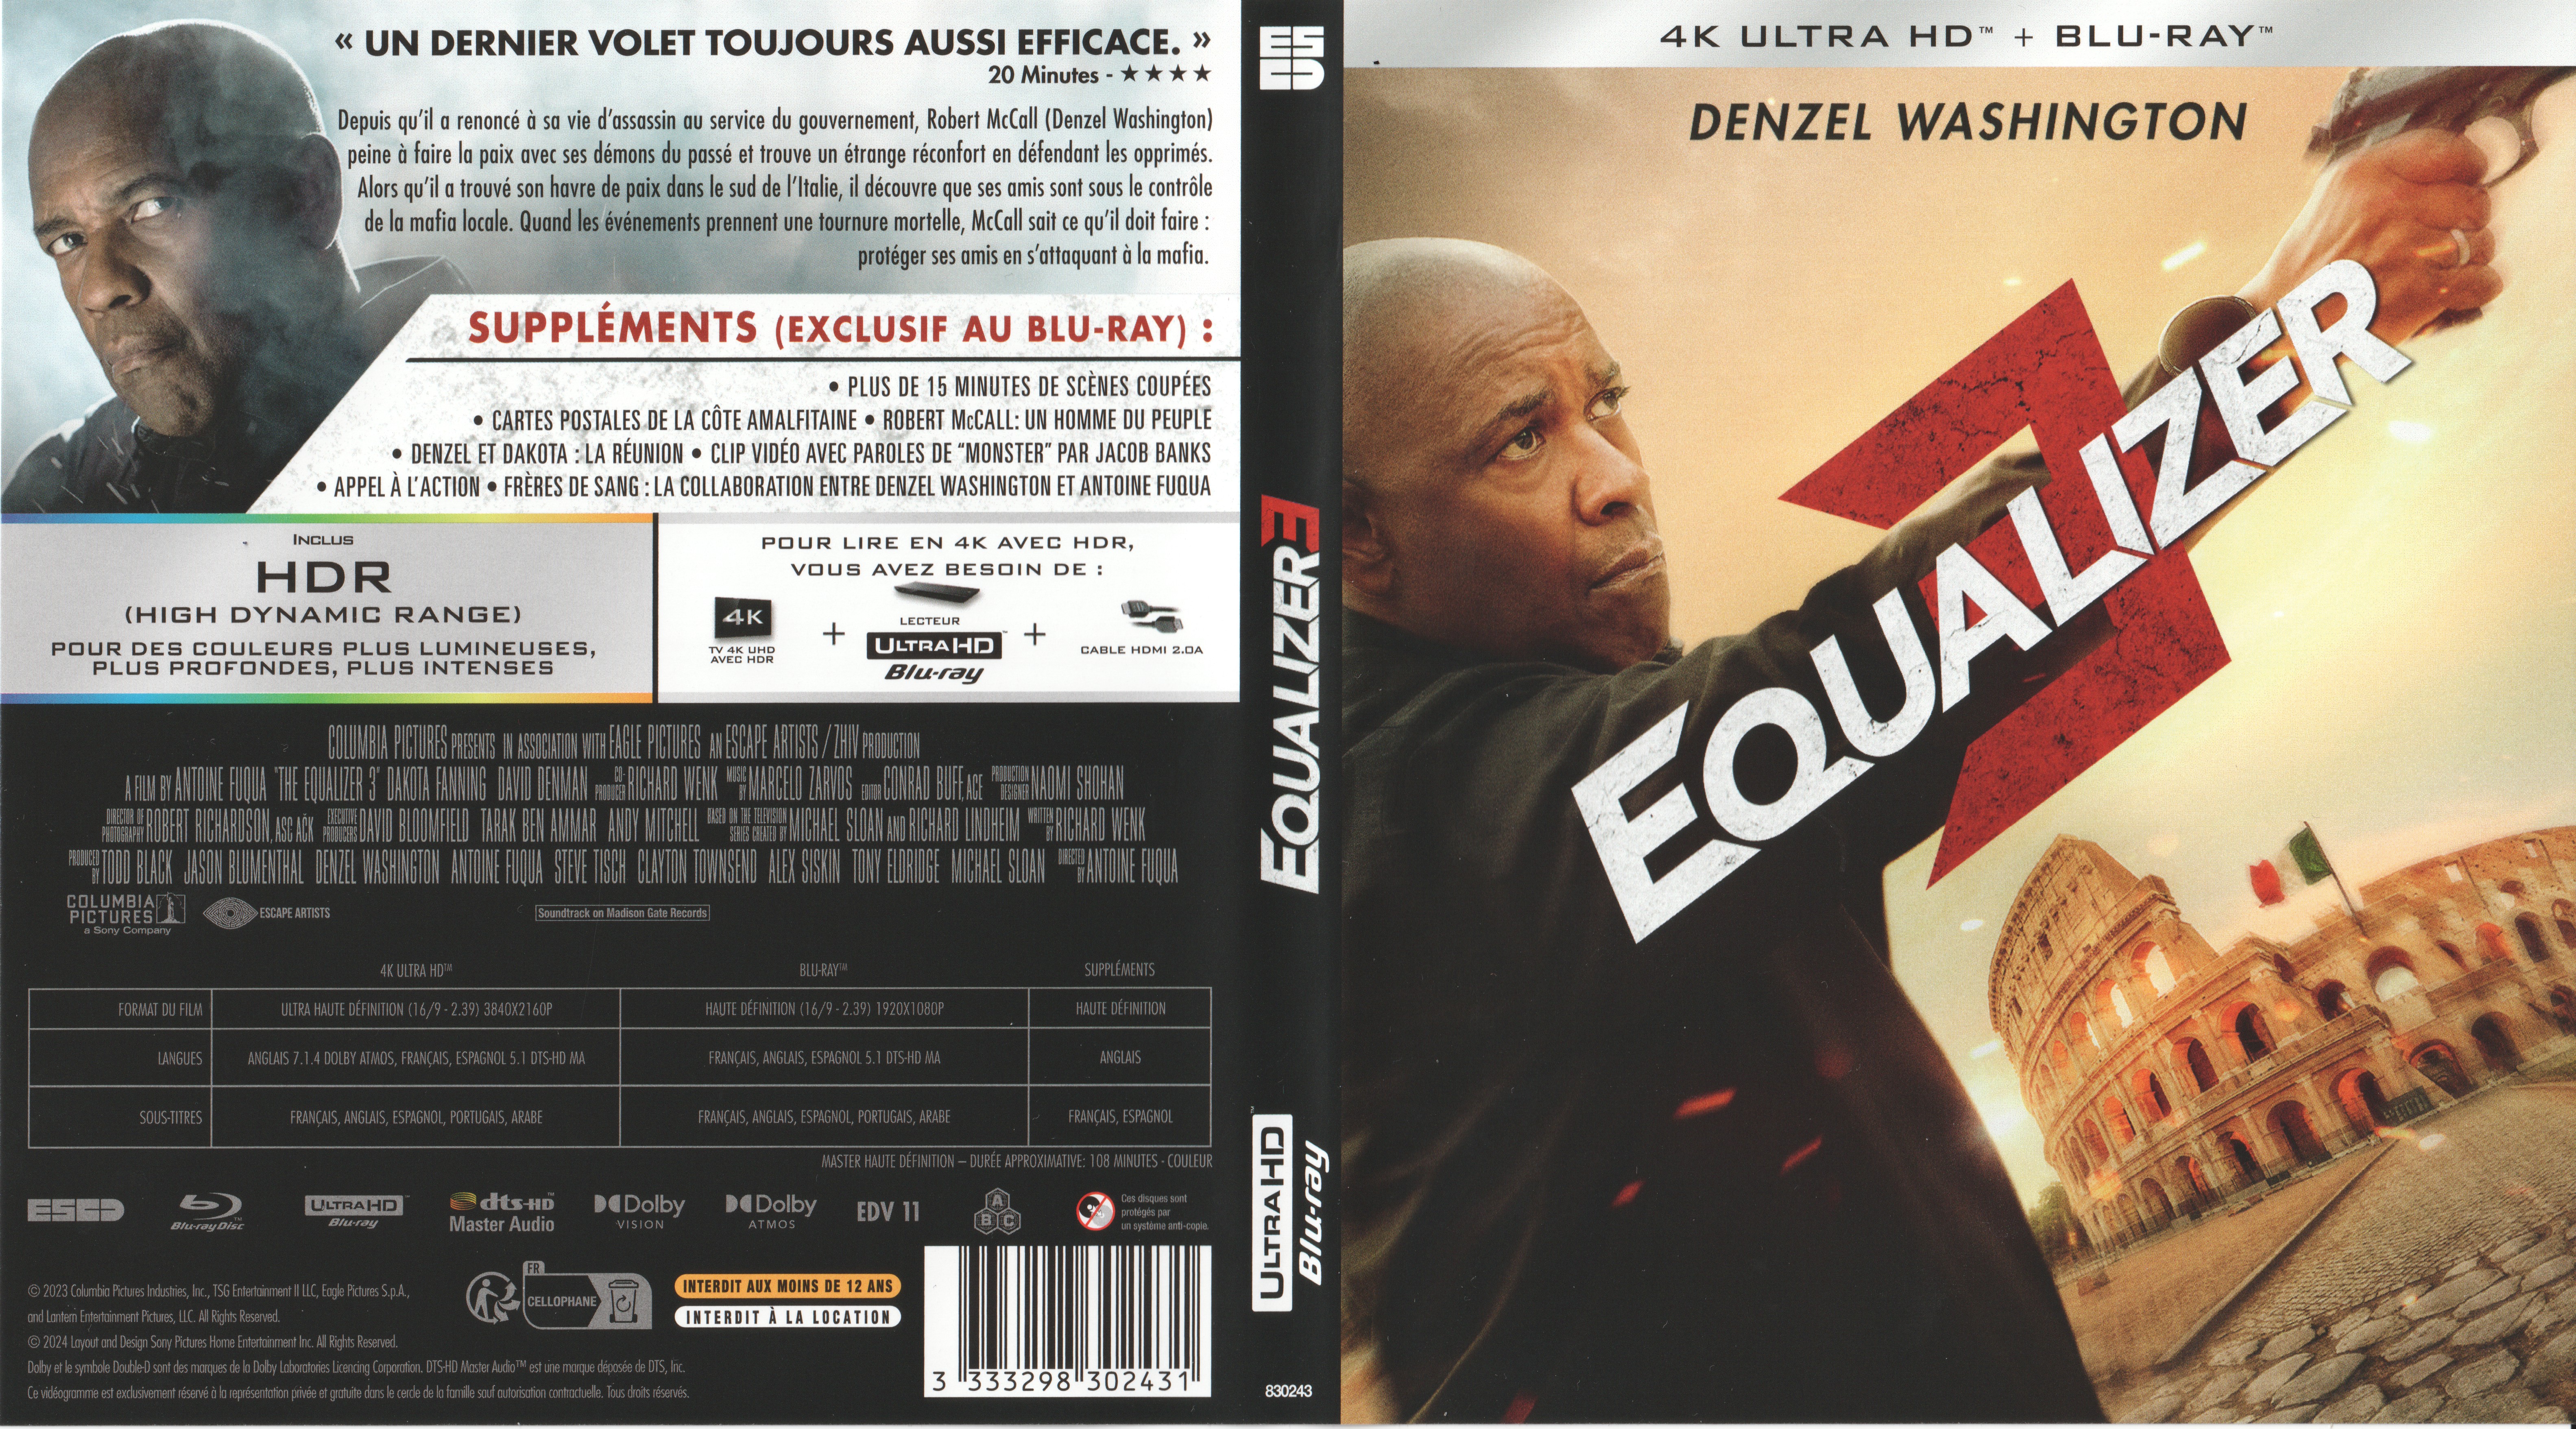 Jaquette DVD Equalizer 3 4K (BLU-RAY)